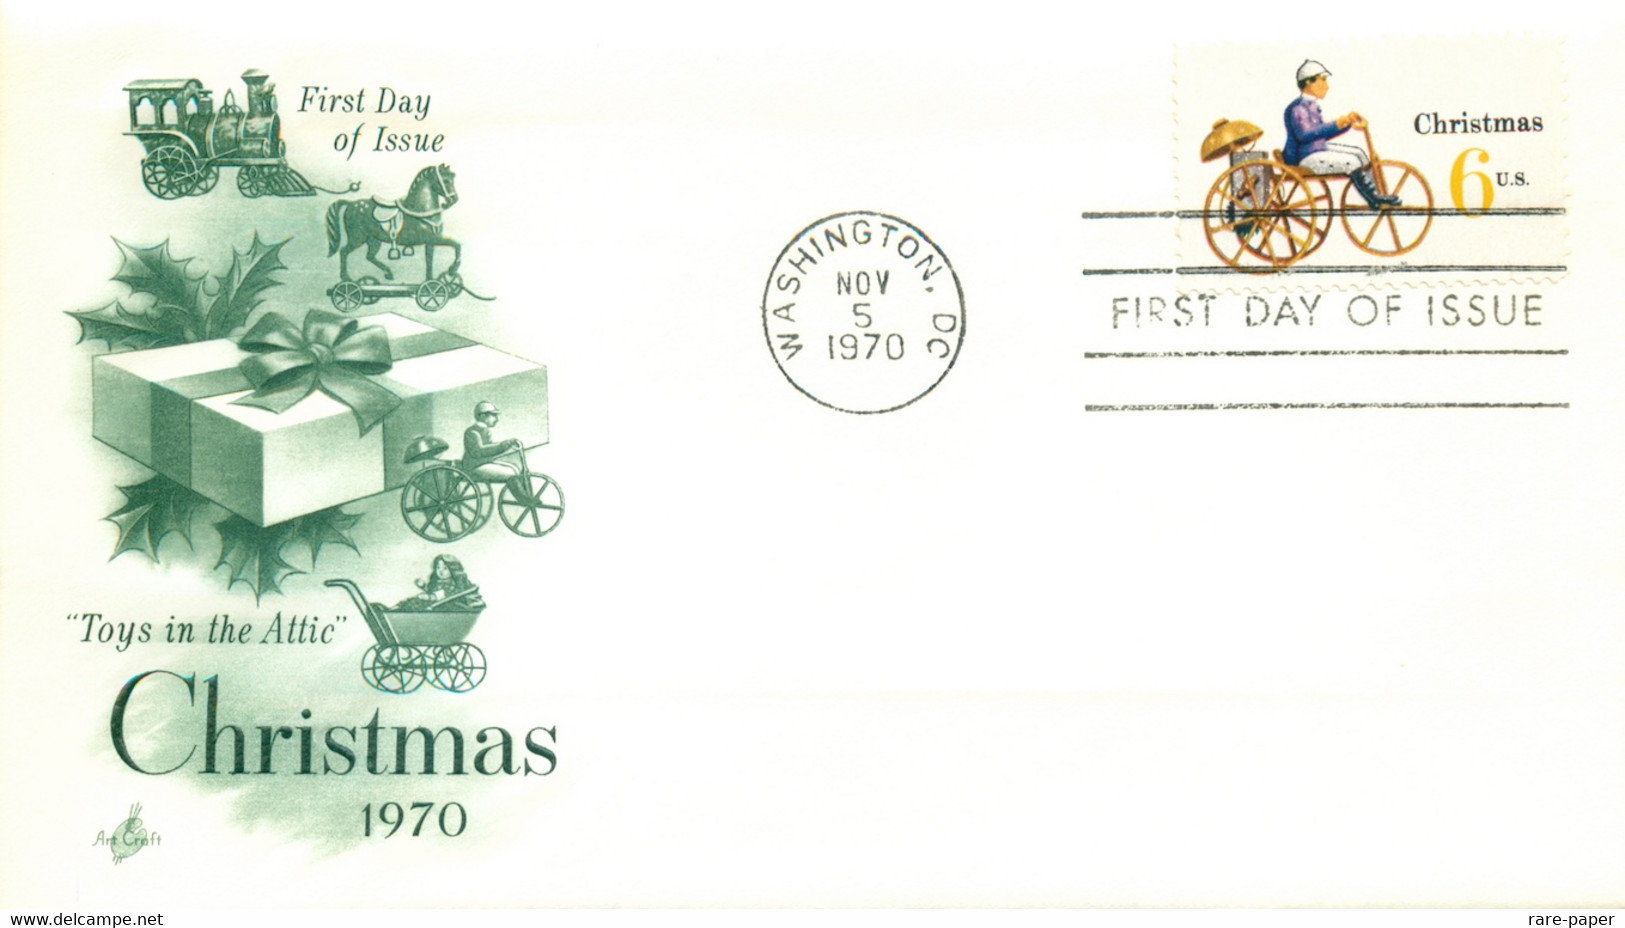 39 x First Day of Issue Covers 1969-1971, USA United States Envelopes